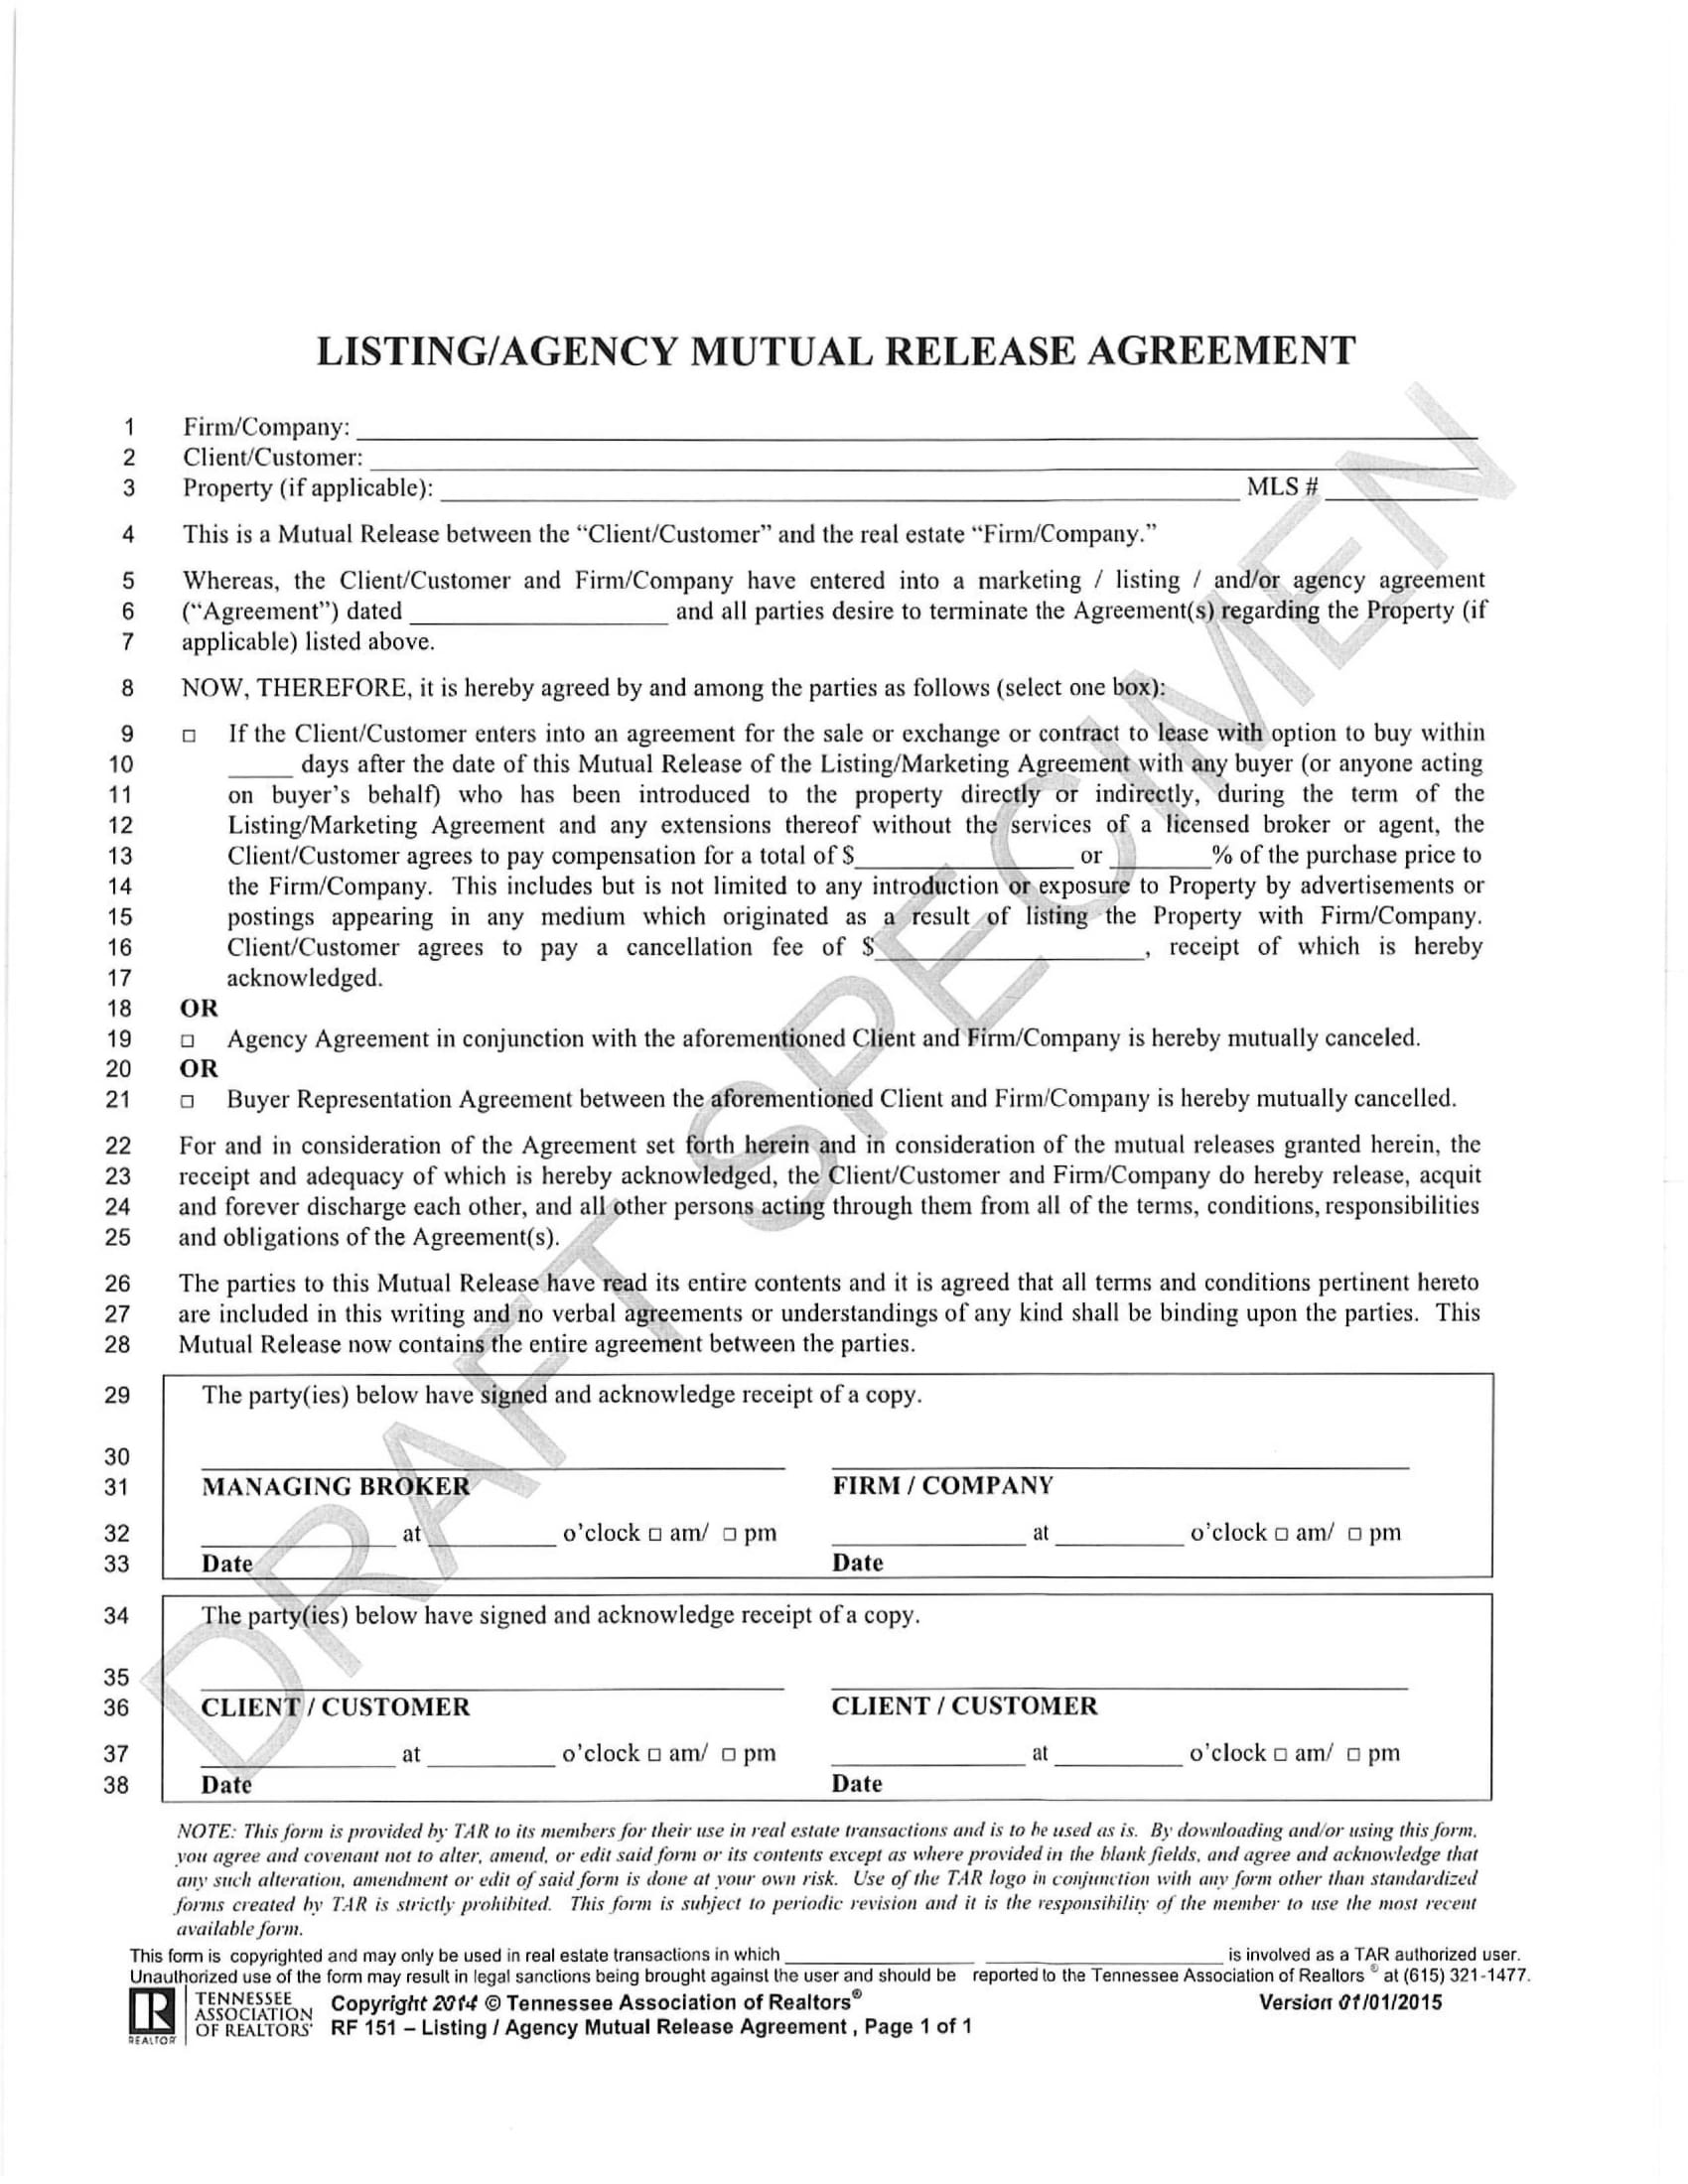 agency mutual release agreement contract form 01